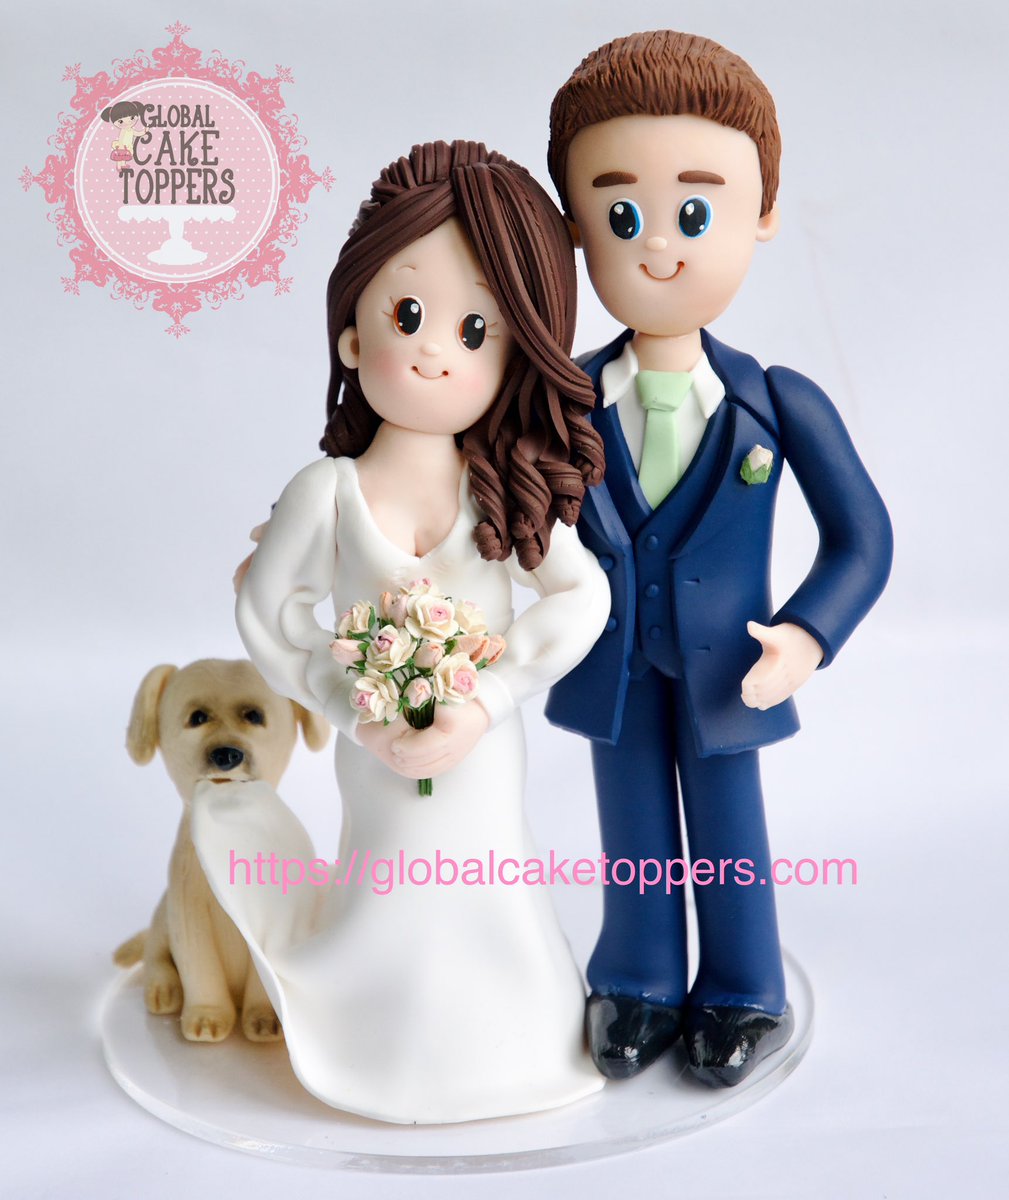 One of our signature style cake toppers 🤗 #cute #couple #weddings #weddingcaketrends #weddingphotography #weddingidea #pets #dogs #doglover #happiness #globalcaketoppers #anjalitambde @GCTCaketoppers